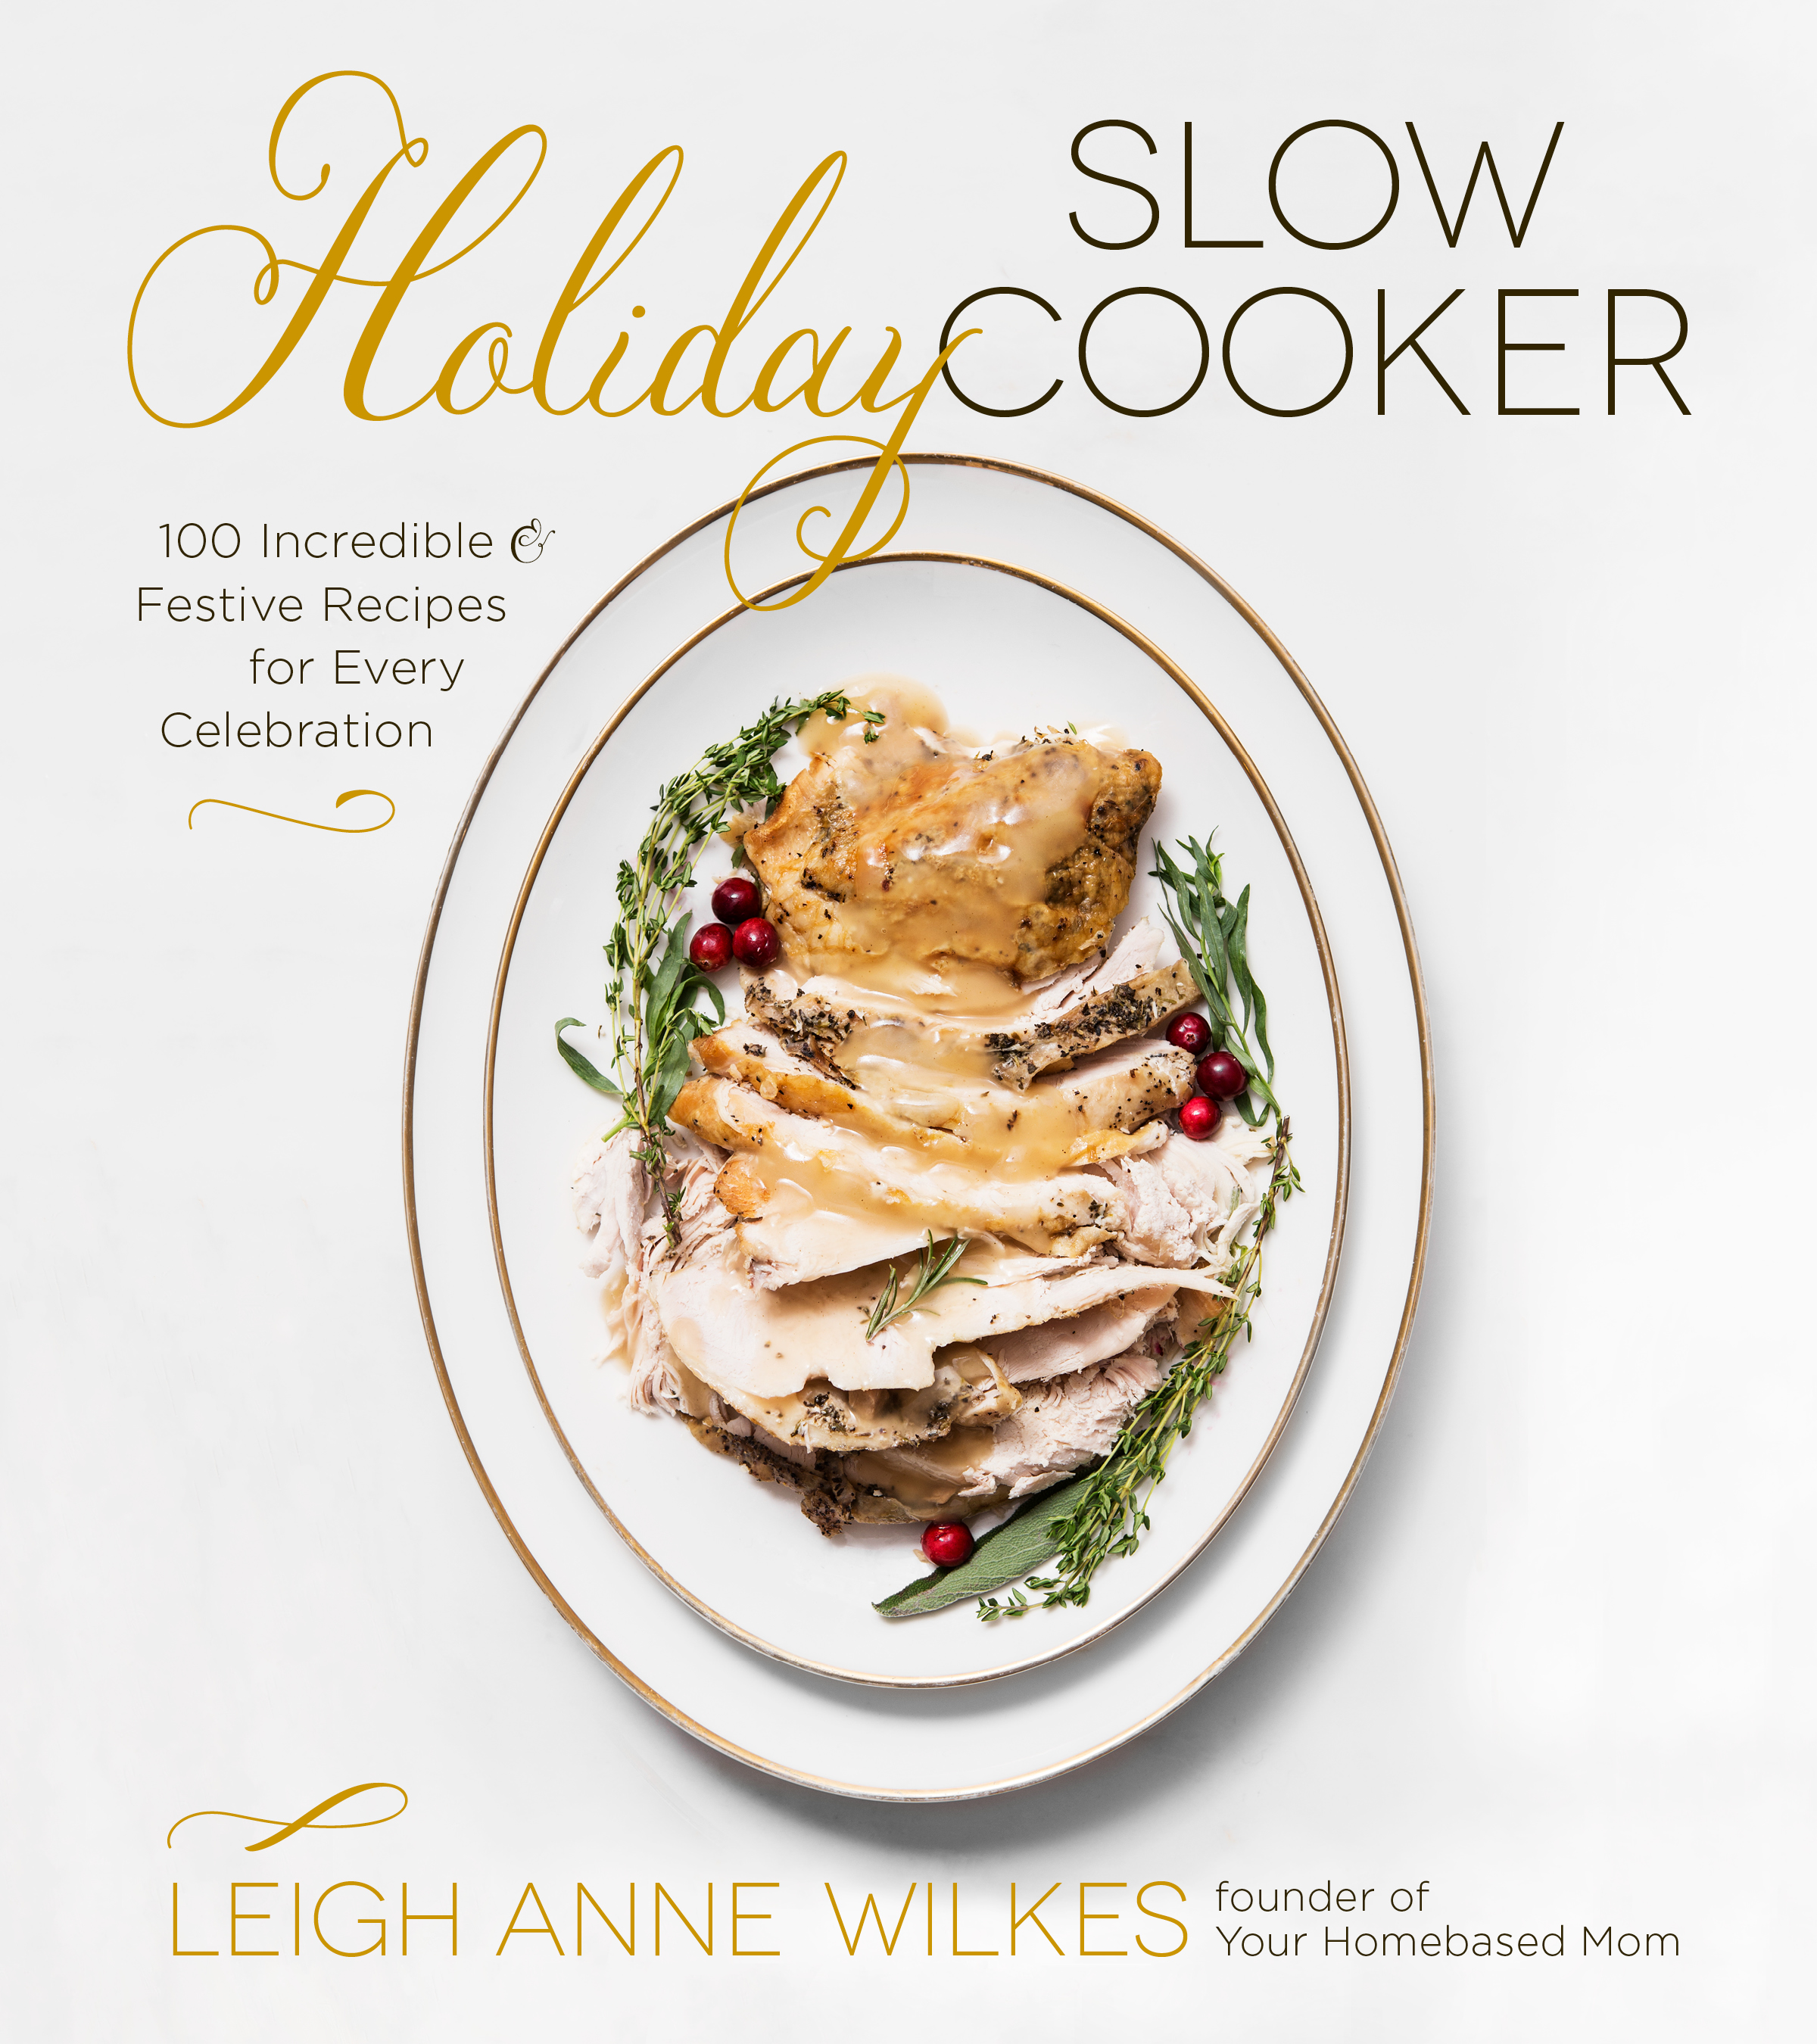 holiday-slow-cooker